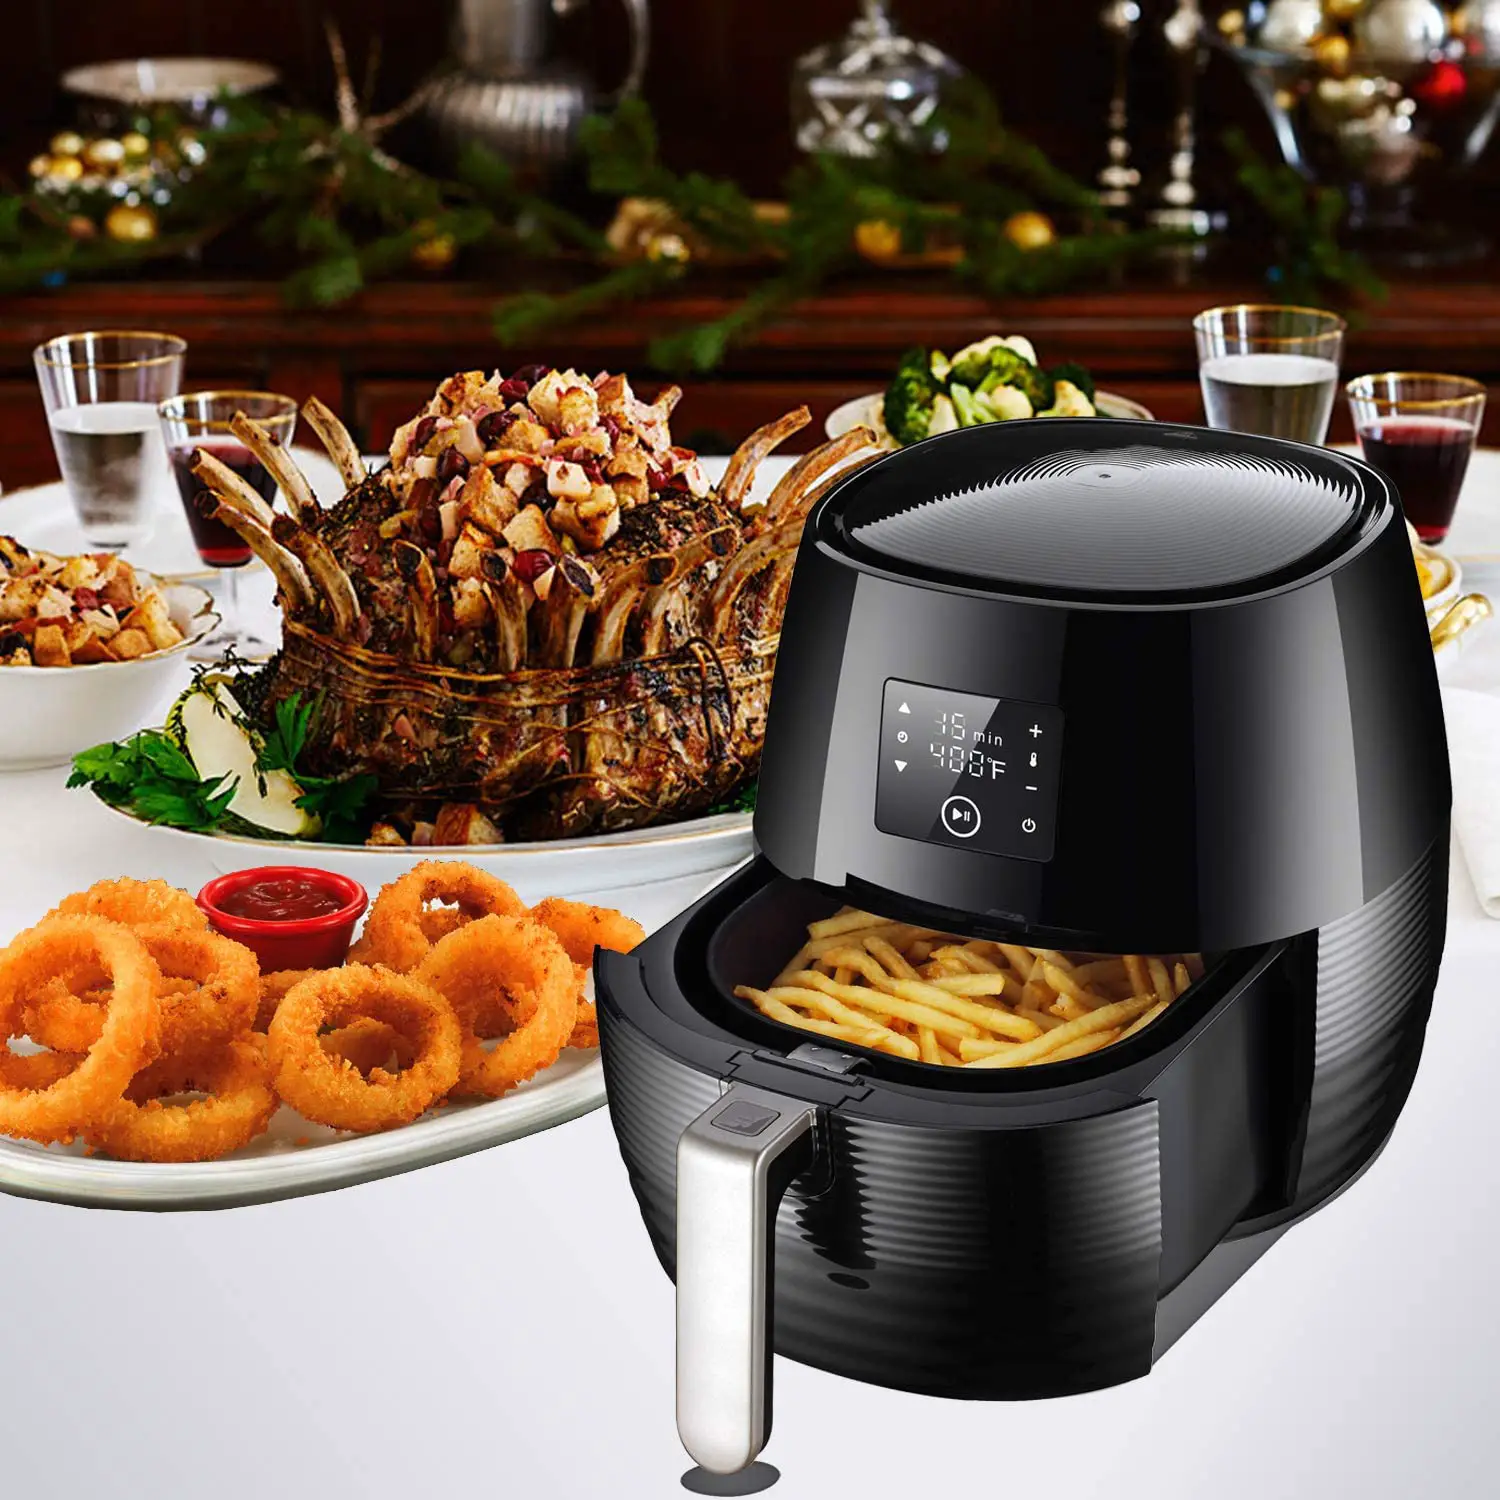 Amazon.com: Air Fryer 5.8QT 1400W Less Heal Fat Oil for Multifunctional ...